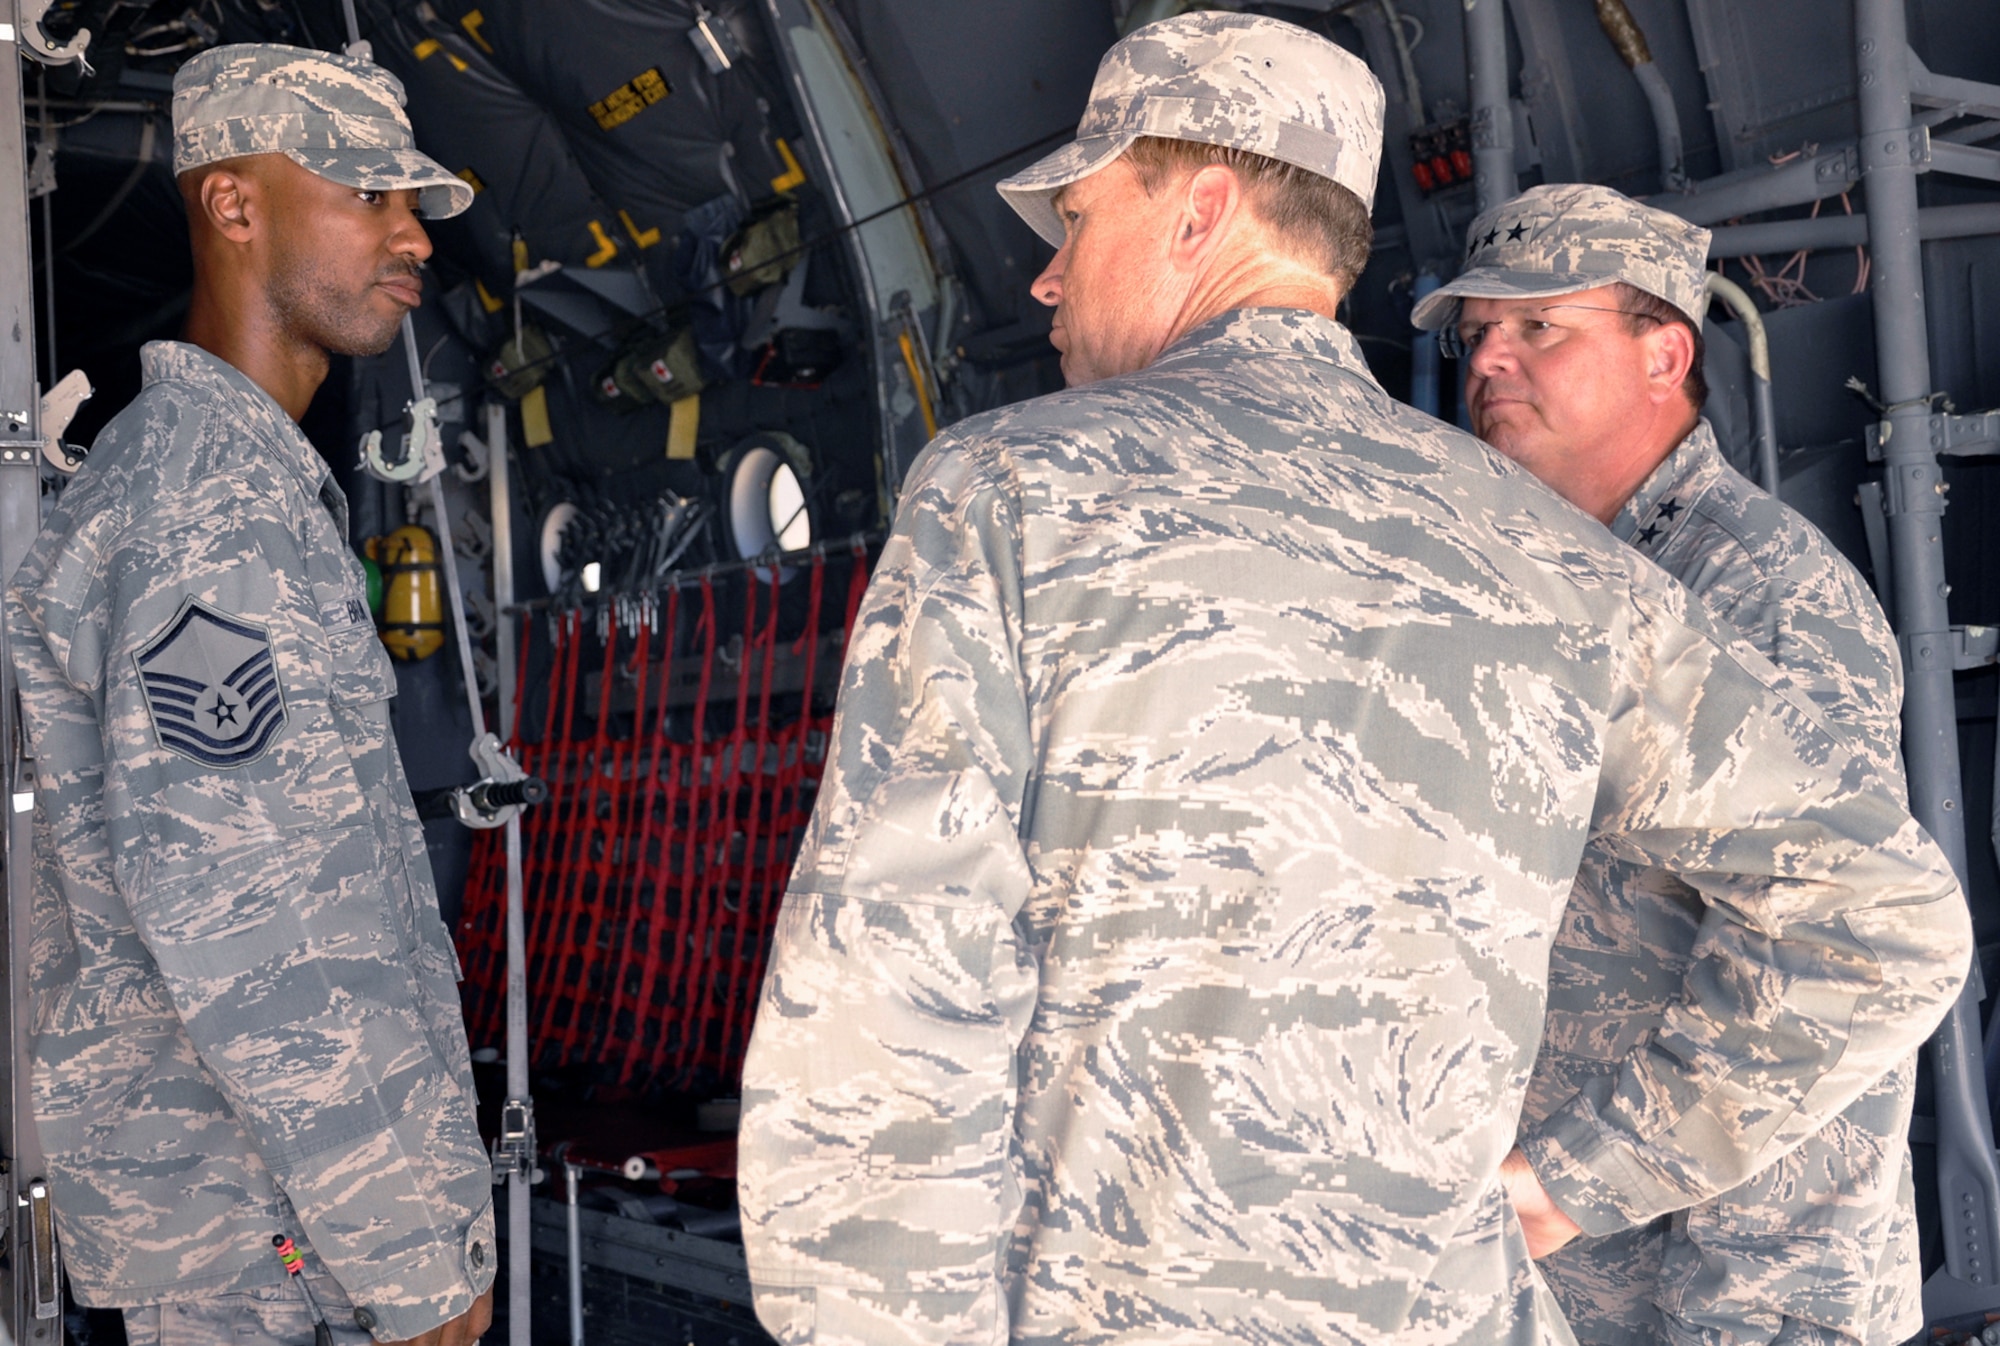 Master Sgt. Ricardo Brown shows the C-130 Hercules mockup to Brig. Gen. Darryl W. Burke (center) and Lt. Gen. (Dr.) Charles Green (right) during a tour of the new Medical Readiness Training Center June 25, 2010, at Camp Bullis, Texas. Sergeant Brown is a medical readiness trainer for the 882nd Training Group. General Burke is the 82nd Training Wing commander. General Green is the Air Force Surgeon General. (Department of Defense photo/Steve Elliott)